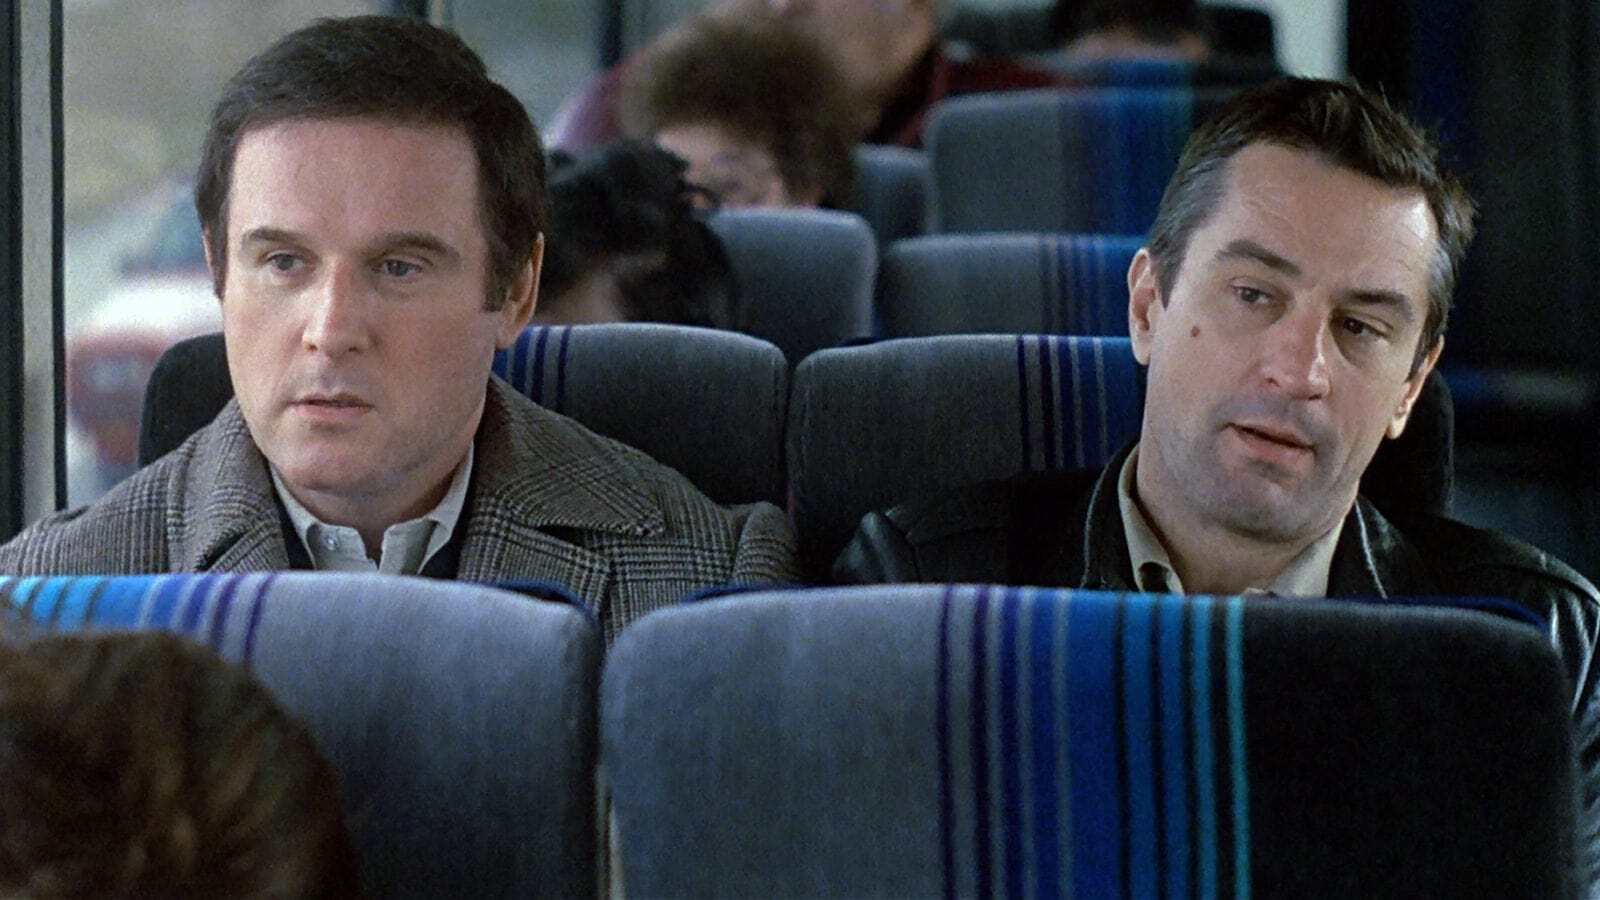 <p>Robert De Niro in a New York to Los Angeles <a href="https://www.rollingstone.com/movies/movie-features/midnight-run-30th-anniversary-699279/">buddy comedy</a>, need anyone say more? The <a href="https://www.imdb.com/title/tt0095631/">film</a> was both a critical and commercial success, spawning <a href="https://en-academic.com/dic.nsf/enwiki/6011564">three made-for-TV sequels</a> expanding on the story of various characters throughout the film. With De Niro playing a bounty hunter, the movie perfectly blends hysterical comedy with thrilling excitement and a few heavier, dark moments to keep audiences guessing.</p>